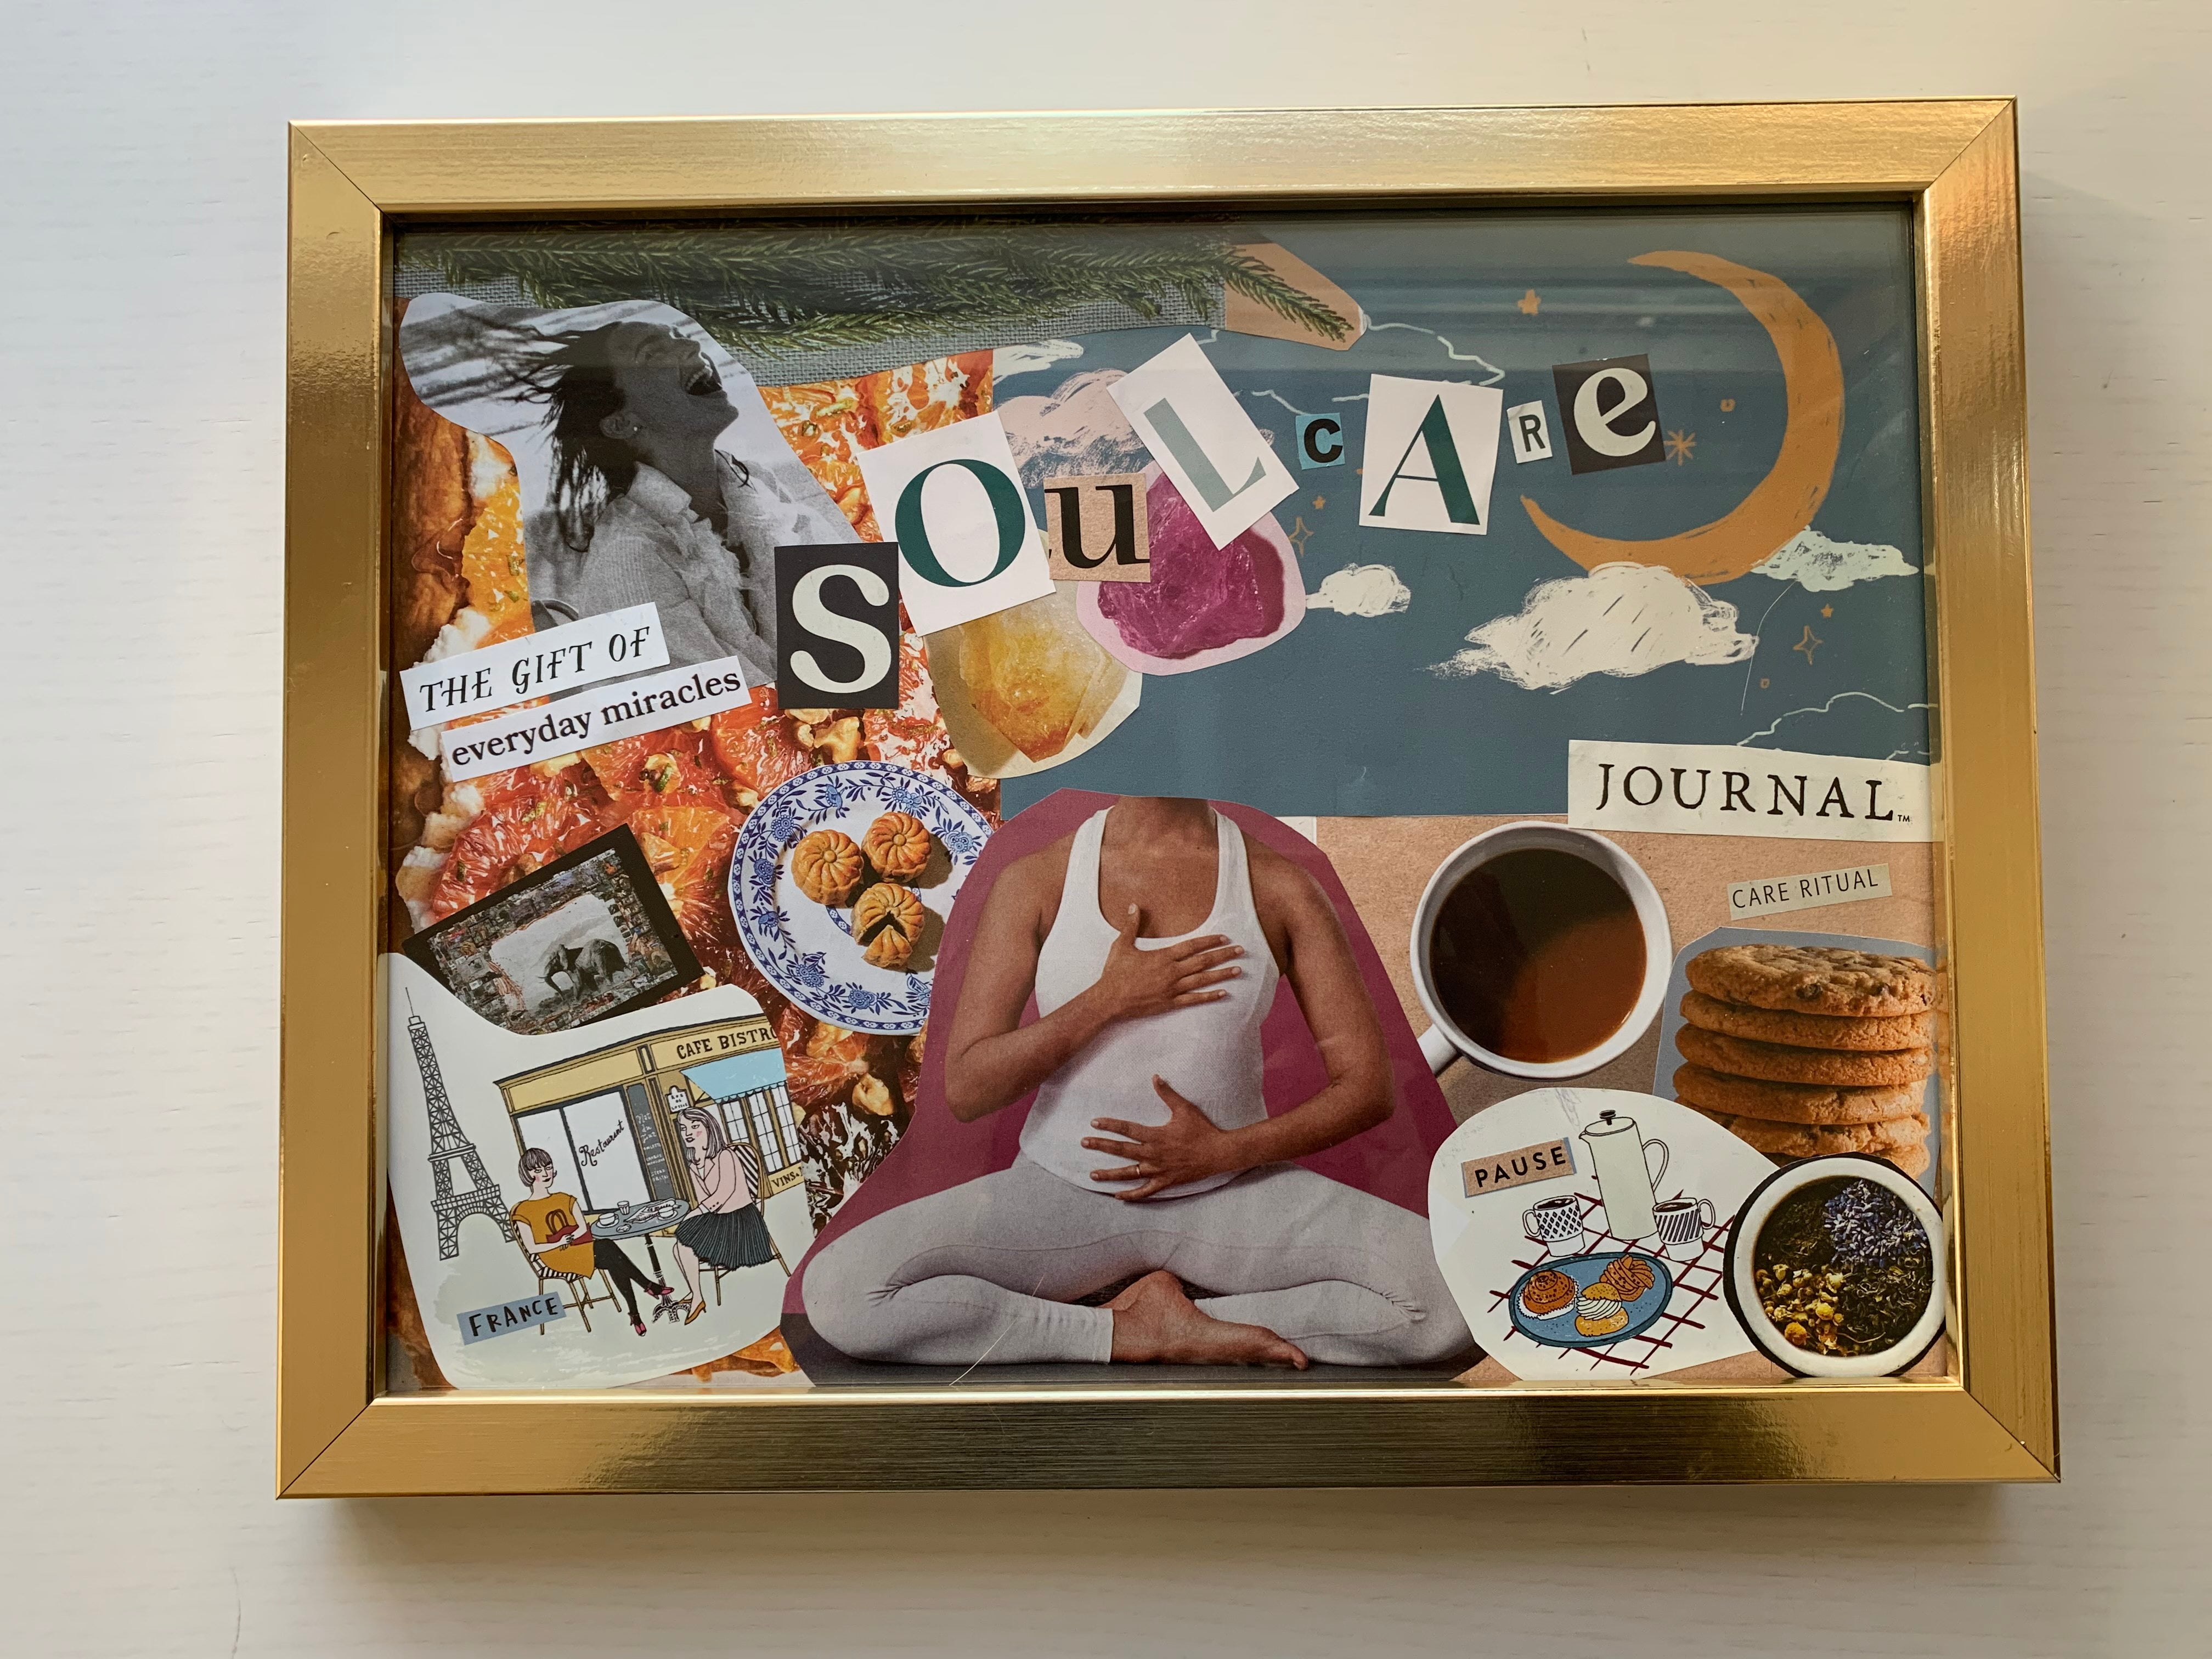 Vision Board — A Powerful Tool To Manifest Your Life Desires - Outside The  Box Education